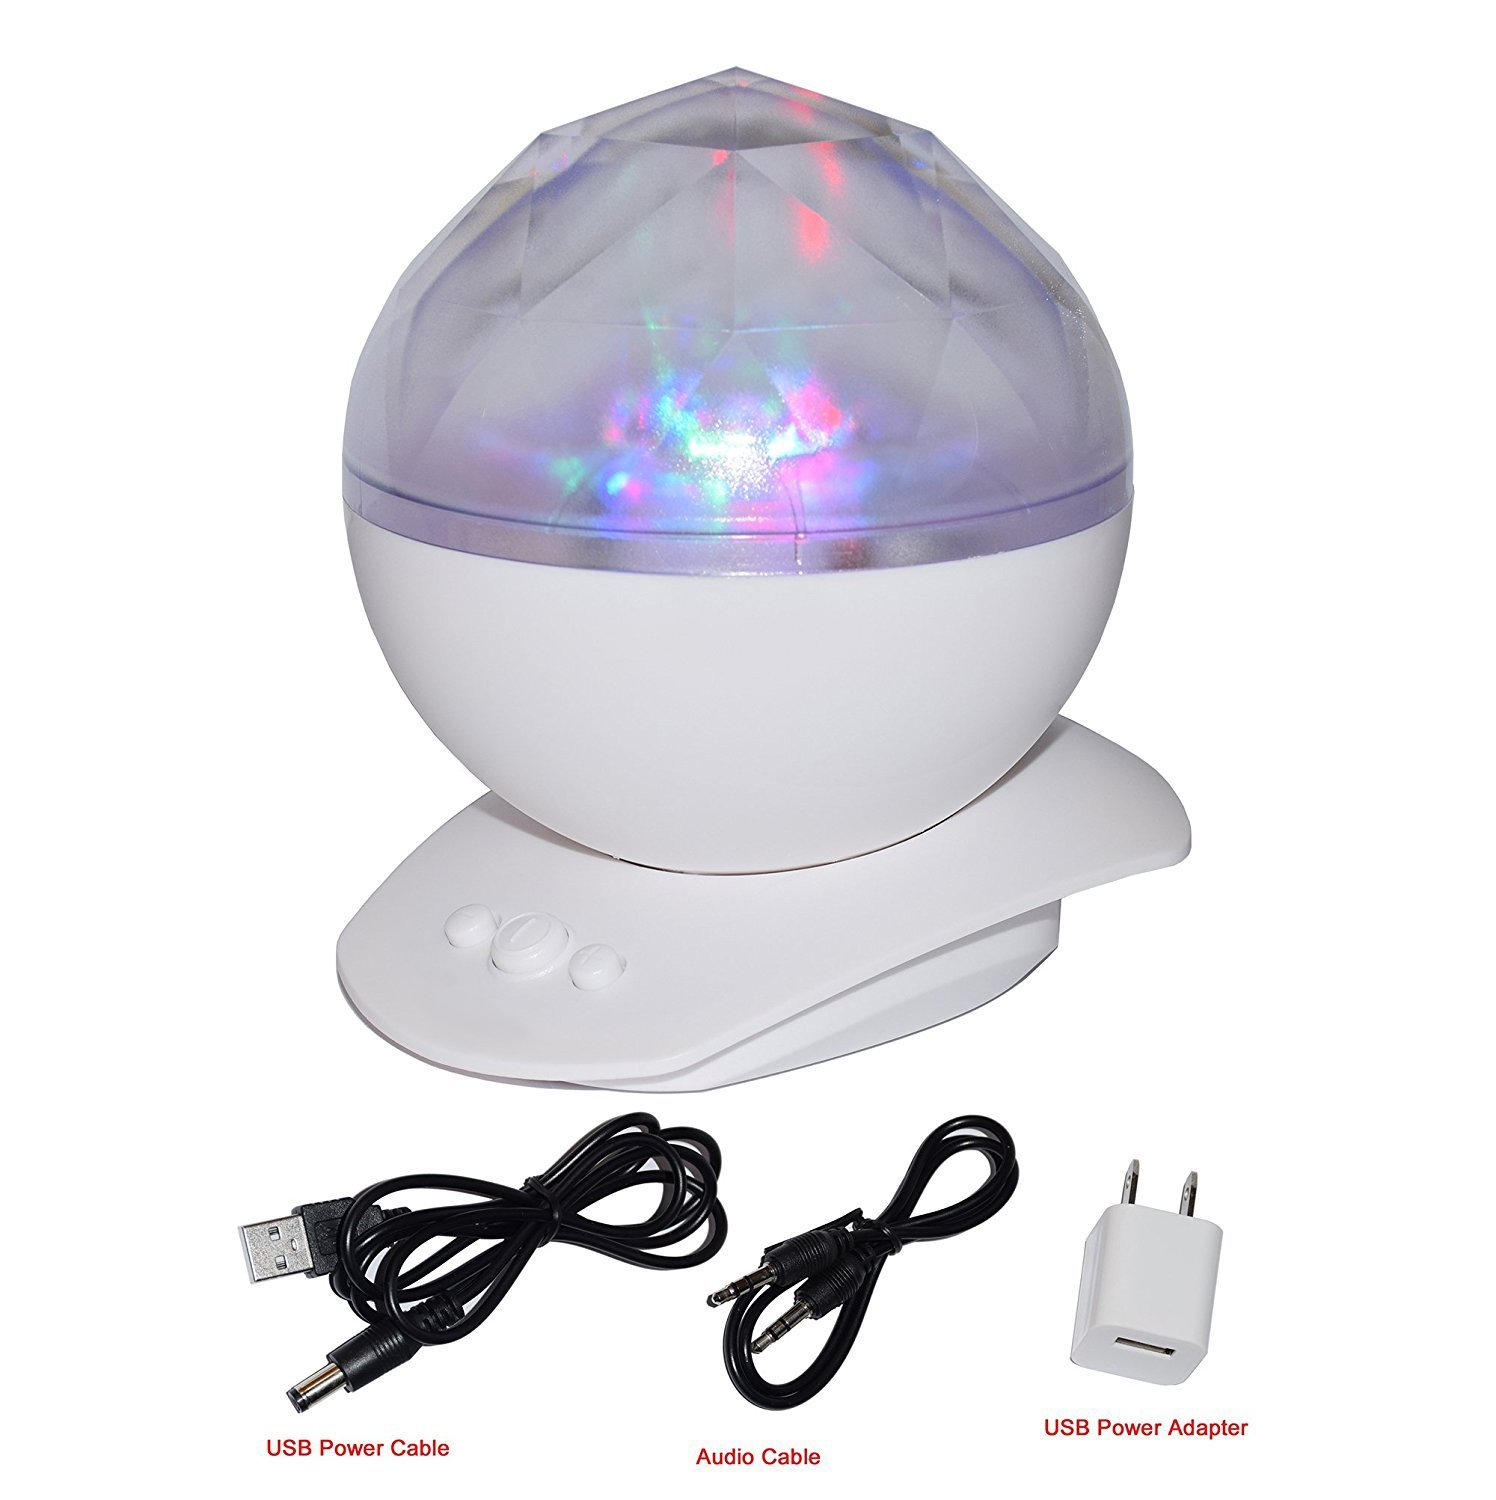 Relaxing Colorful Diamond Light Projection Lamp with Speaker - image 2 of 7